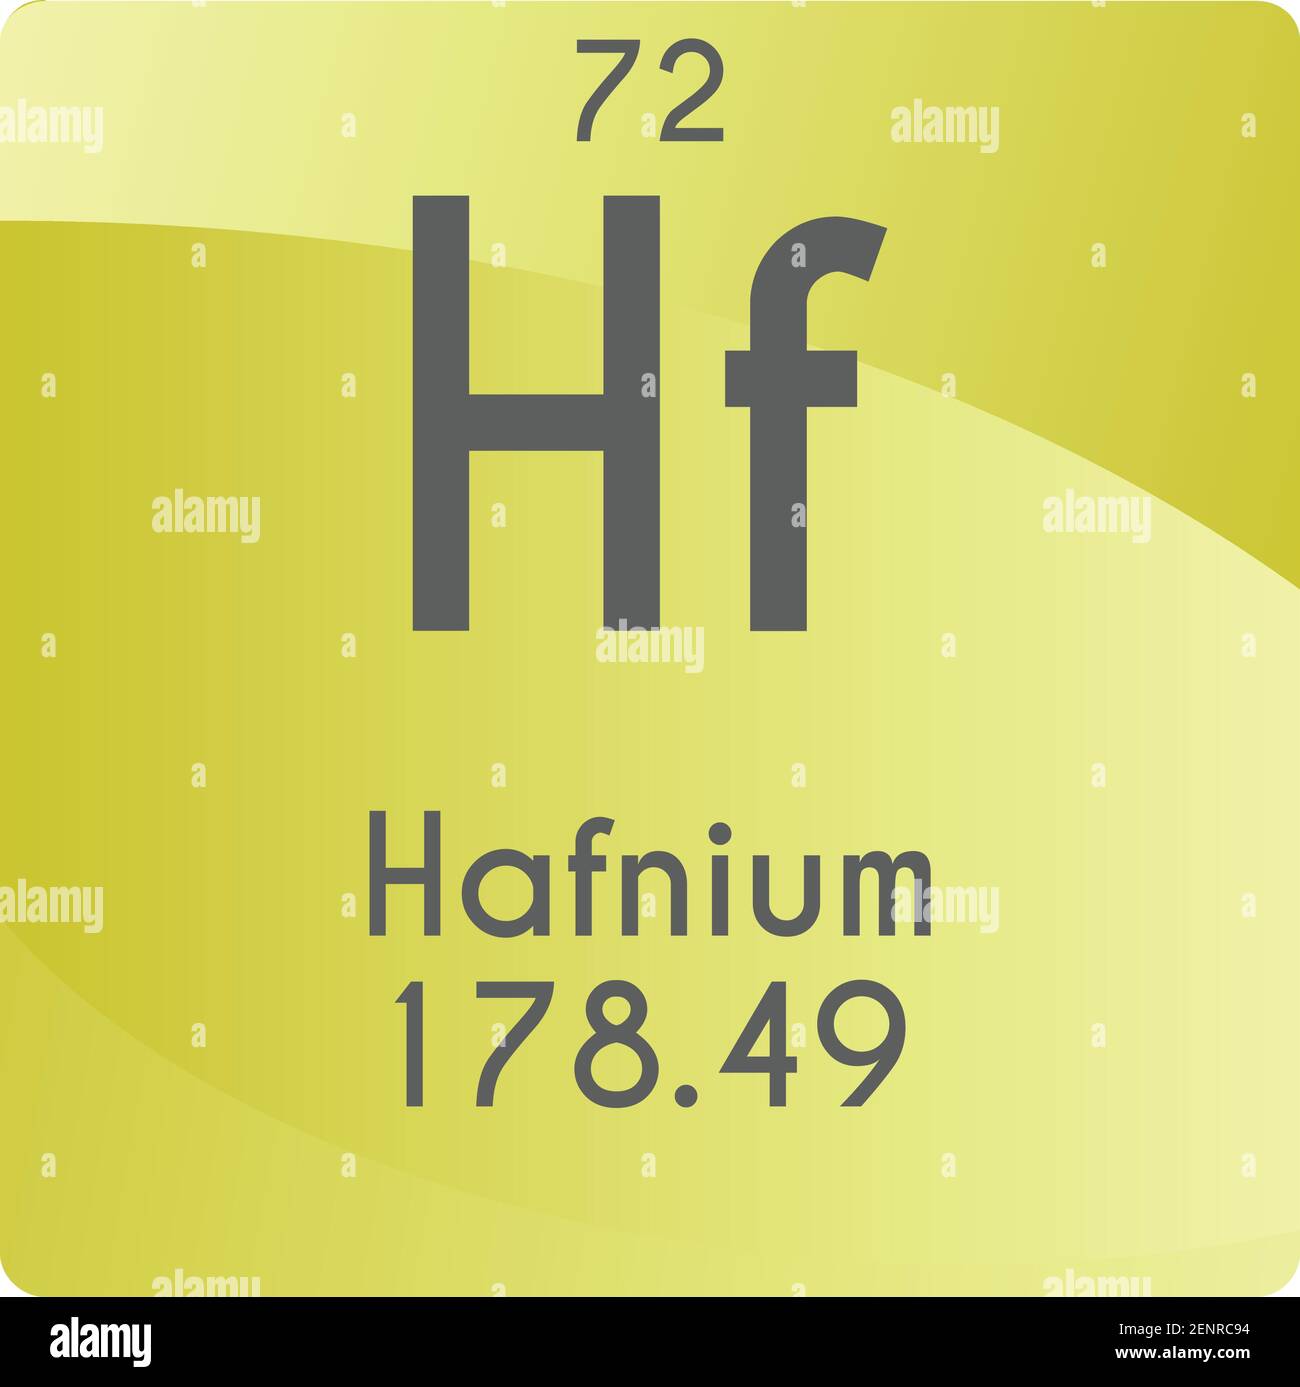 Hf Hafnium Transition metal Chemical Element vector illustration diagram, with atomic number and mass. Simple gradient flat design For education, lab, Stock Vector